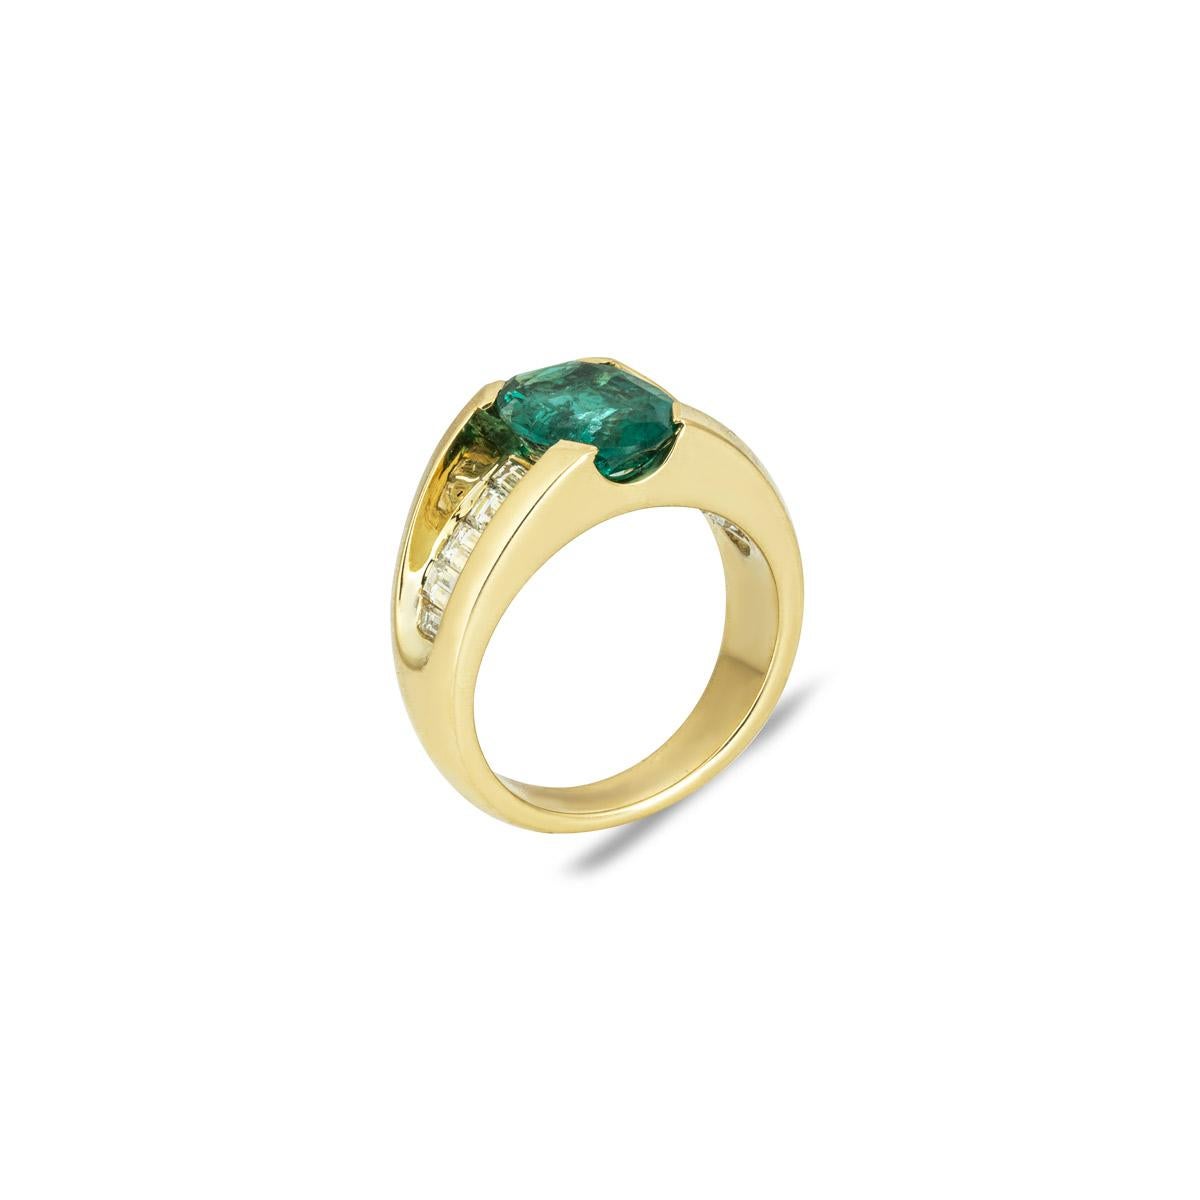 A striking 18k yellow gold emerald and diamond dress ring. The ring showcases an oval cut emerald with a weight of 2.25ct and displays a medium green hue. Further accentuating the emerald are 10 baguette cut diamonds graduating in size on the